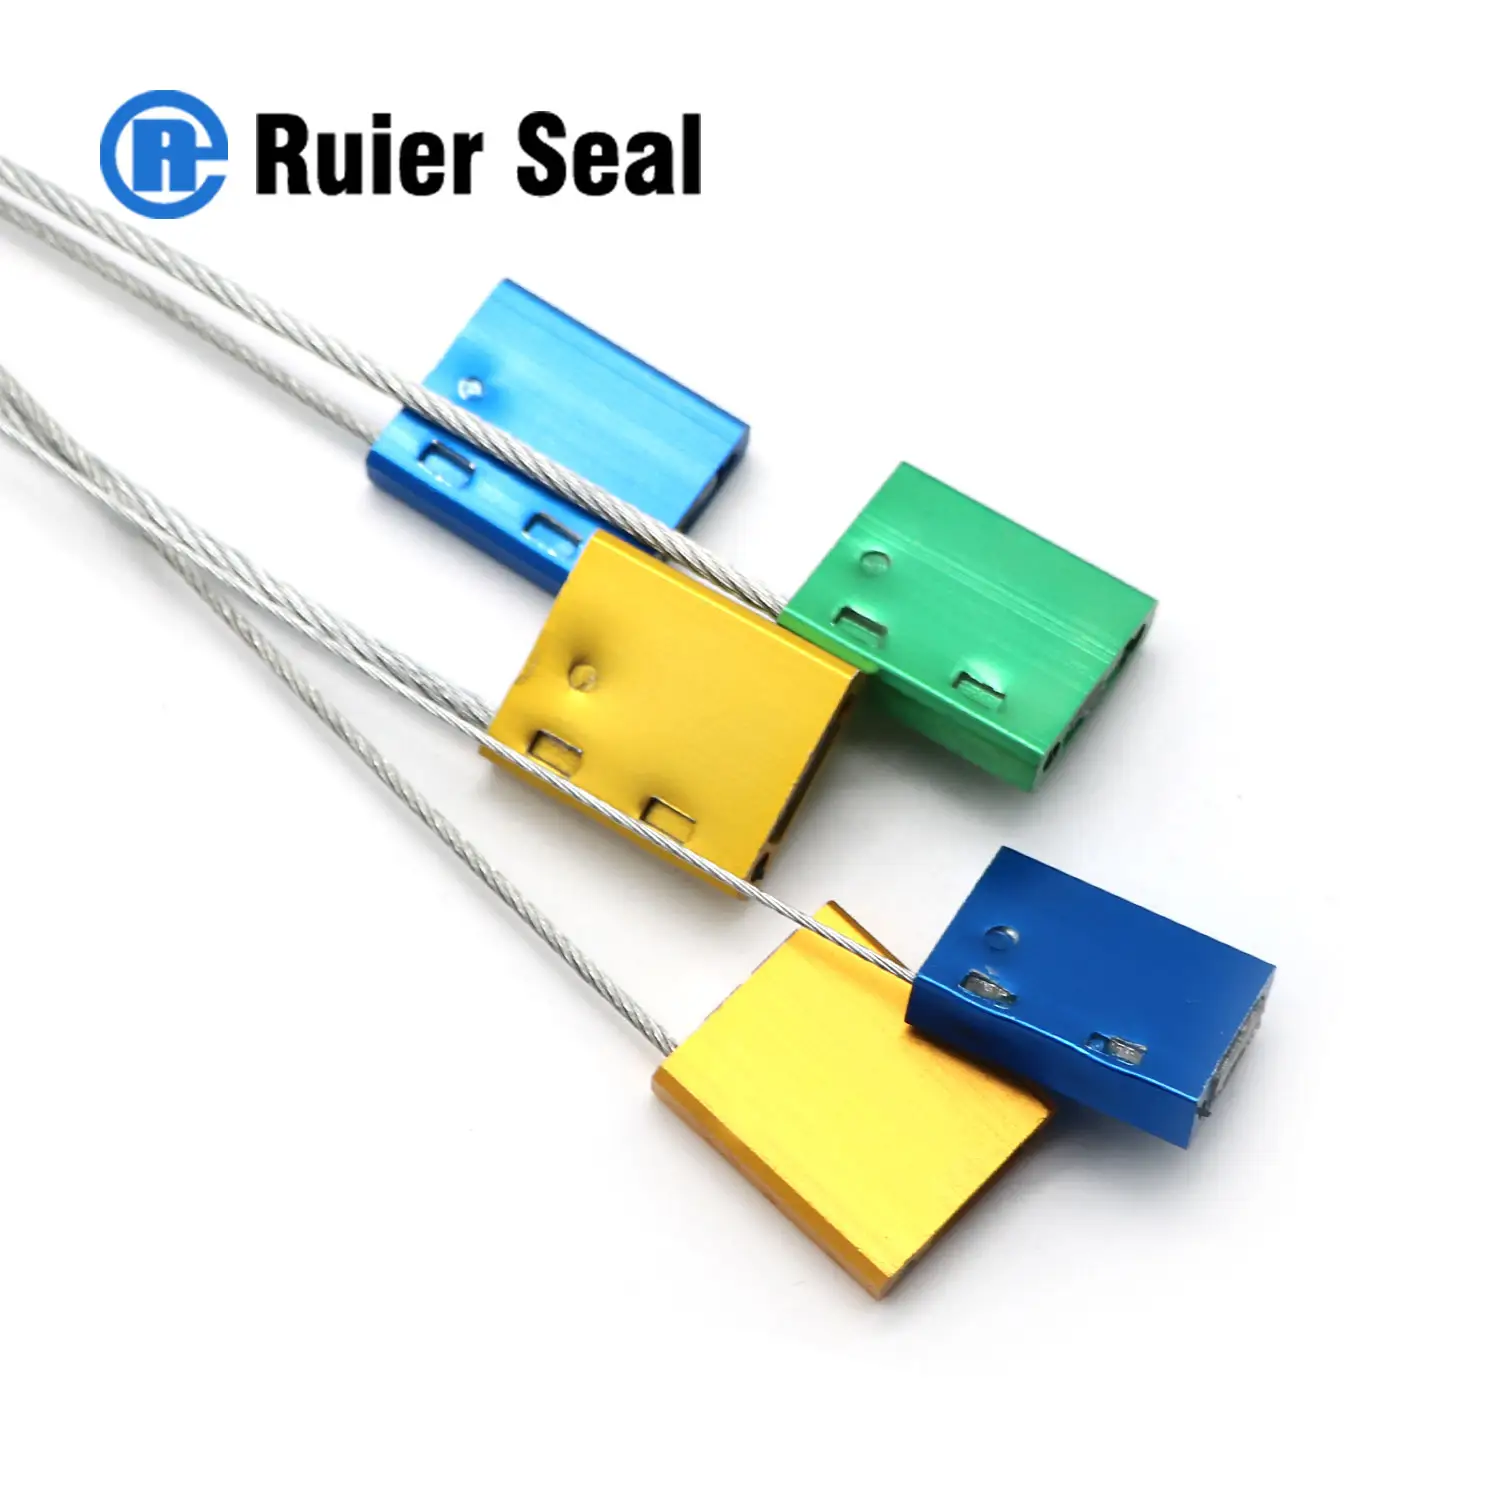 REC101 cable seal for container wire safety container cable seal